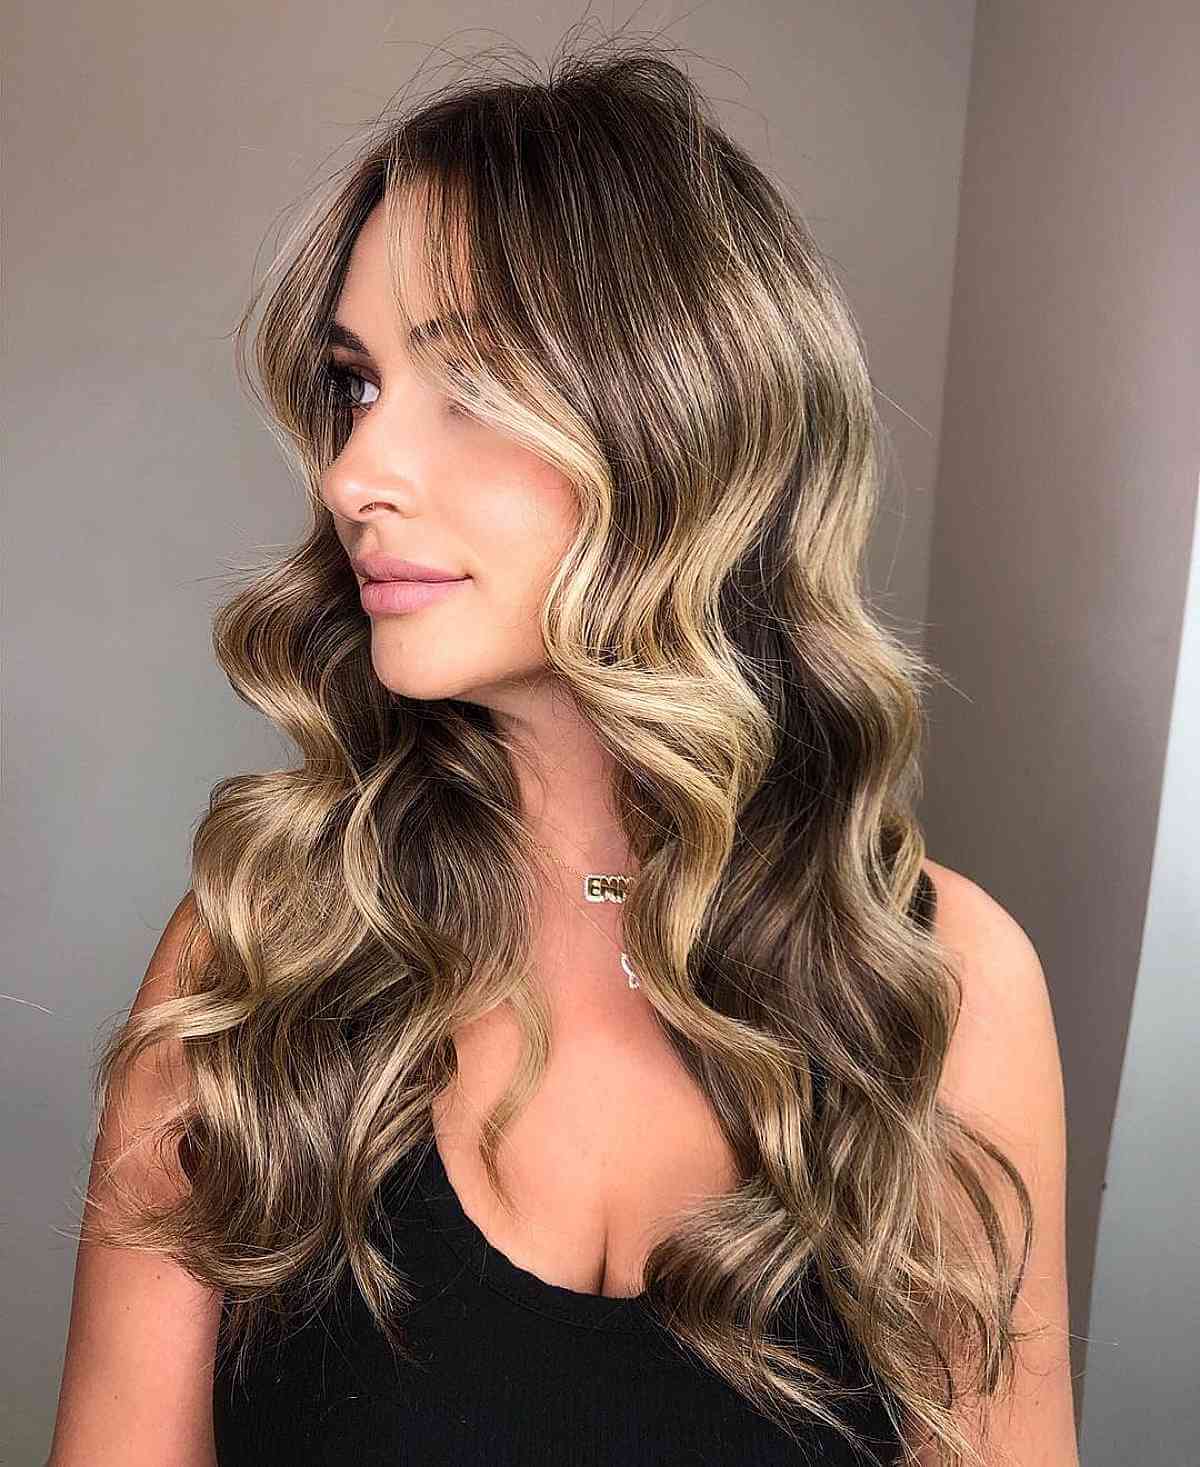 50+ Gorgeous Blonde Balayage Hair Color Ideas to Try This Year